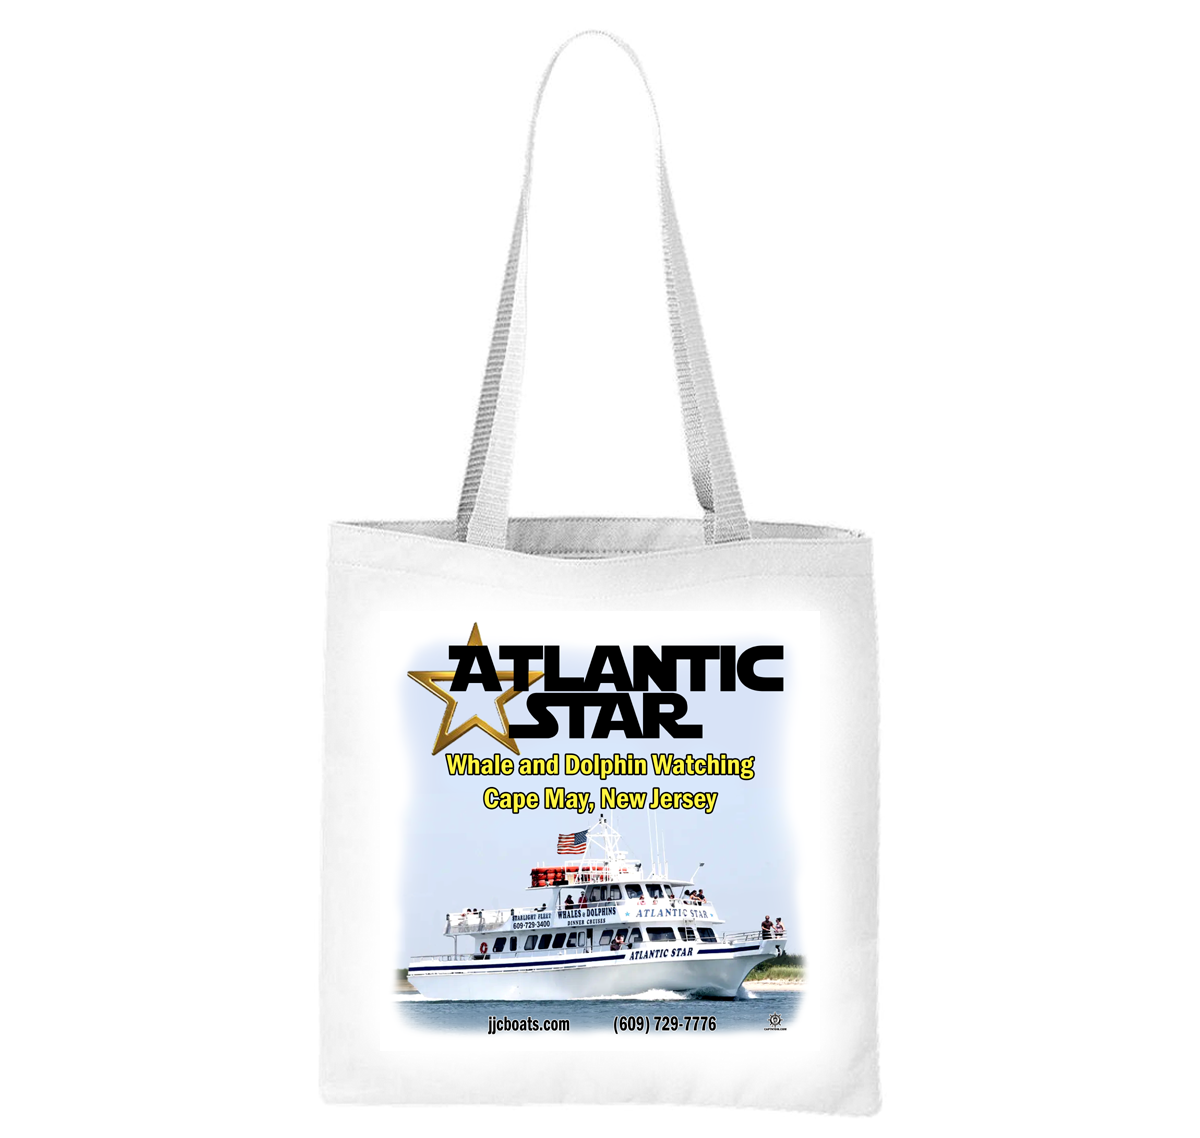 Atlantic Star Whale and Dolphin Watching Liberty Bag